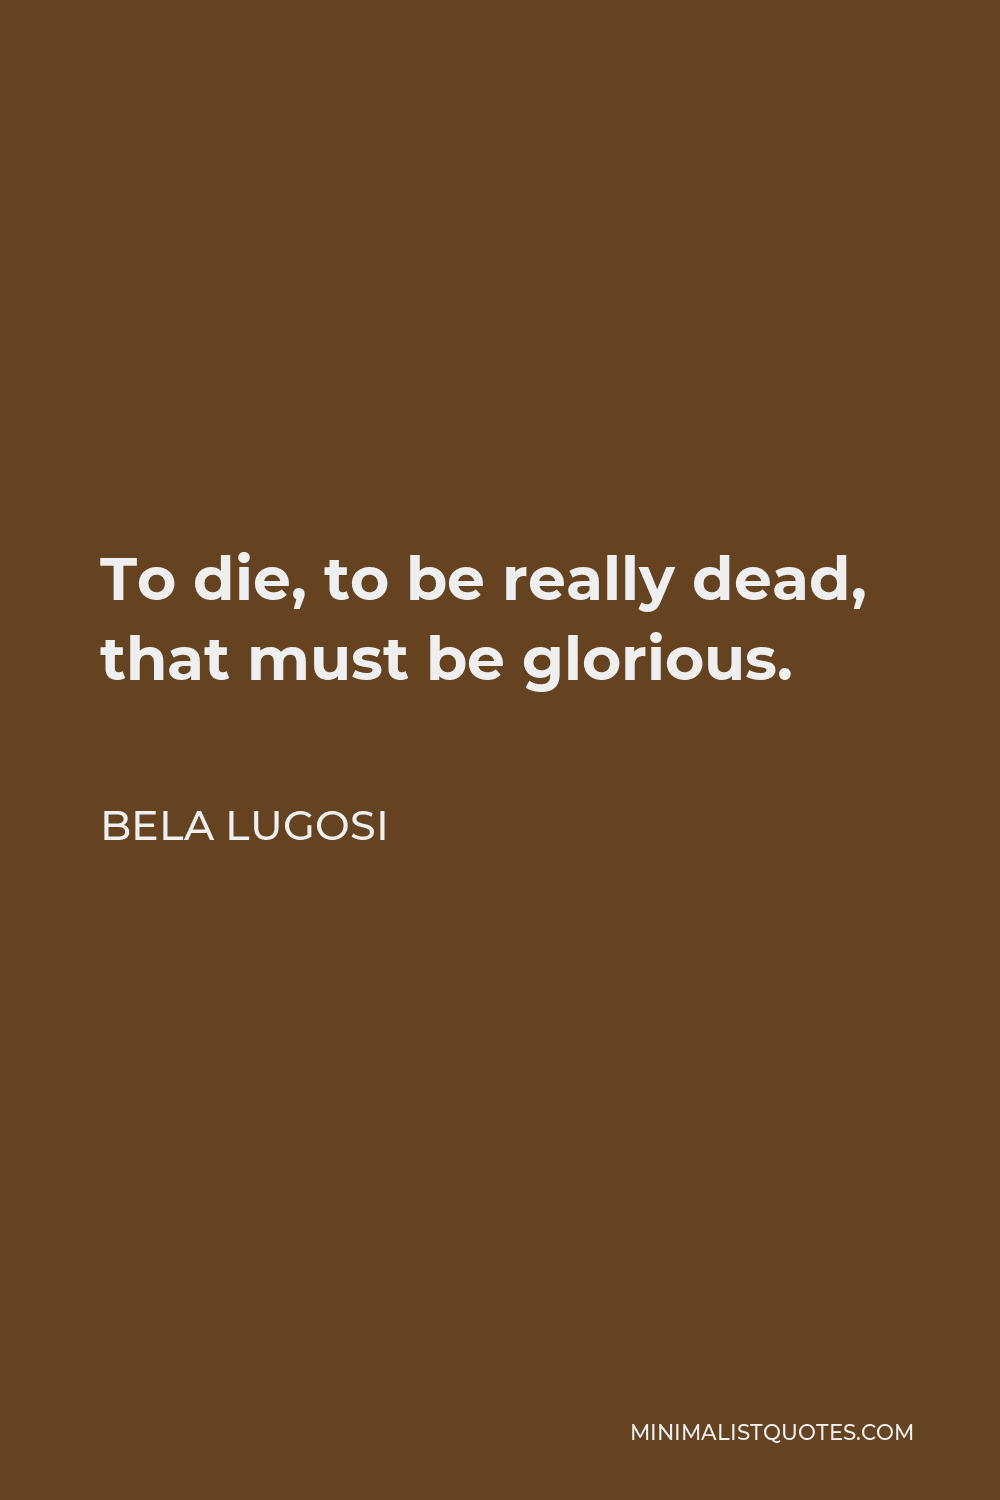 Bela Lugosi Quote - To die, to be really dead, that must be glorious.